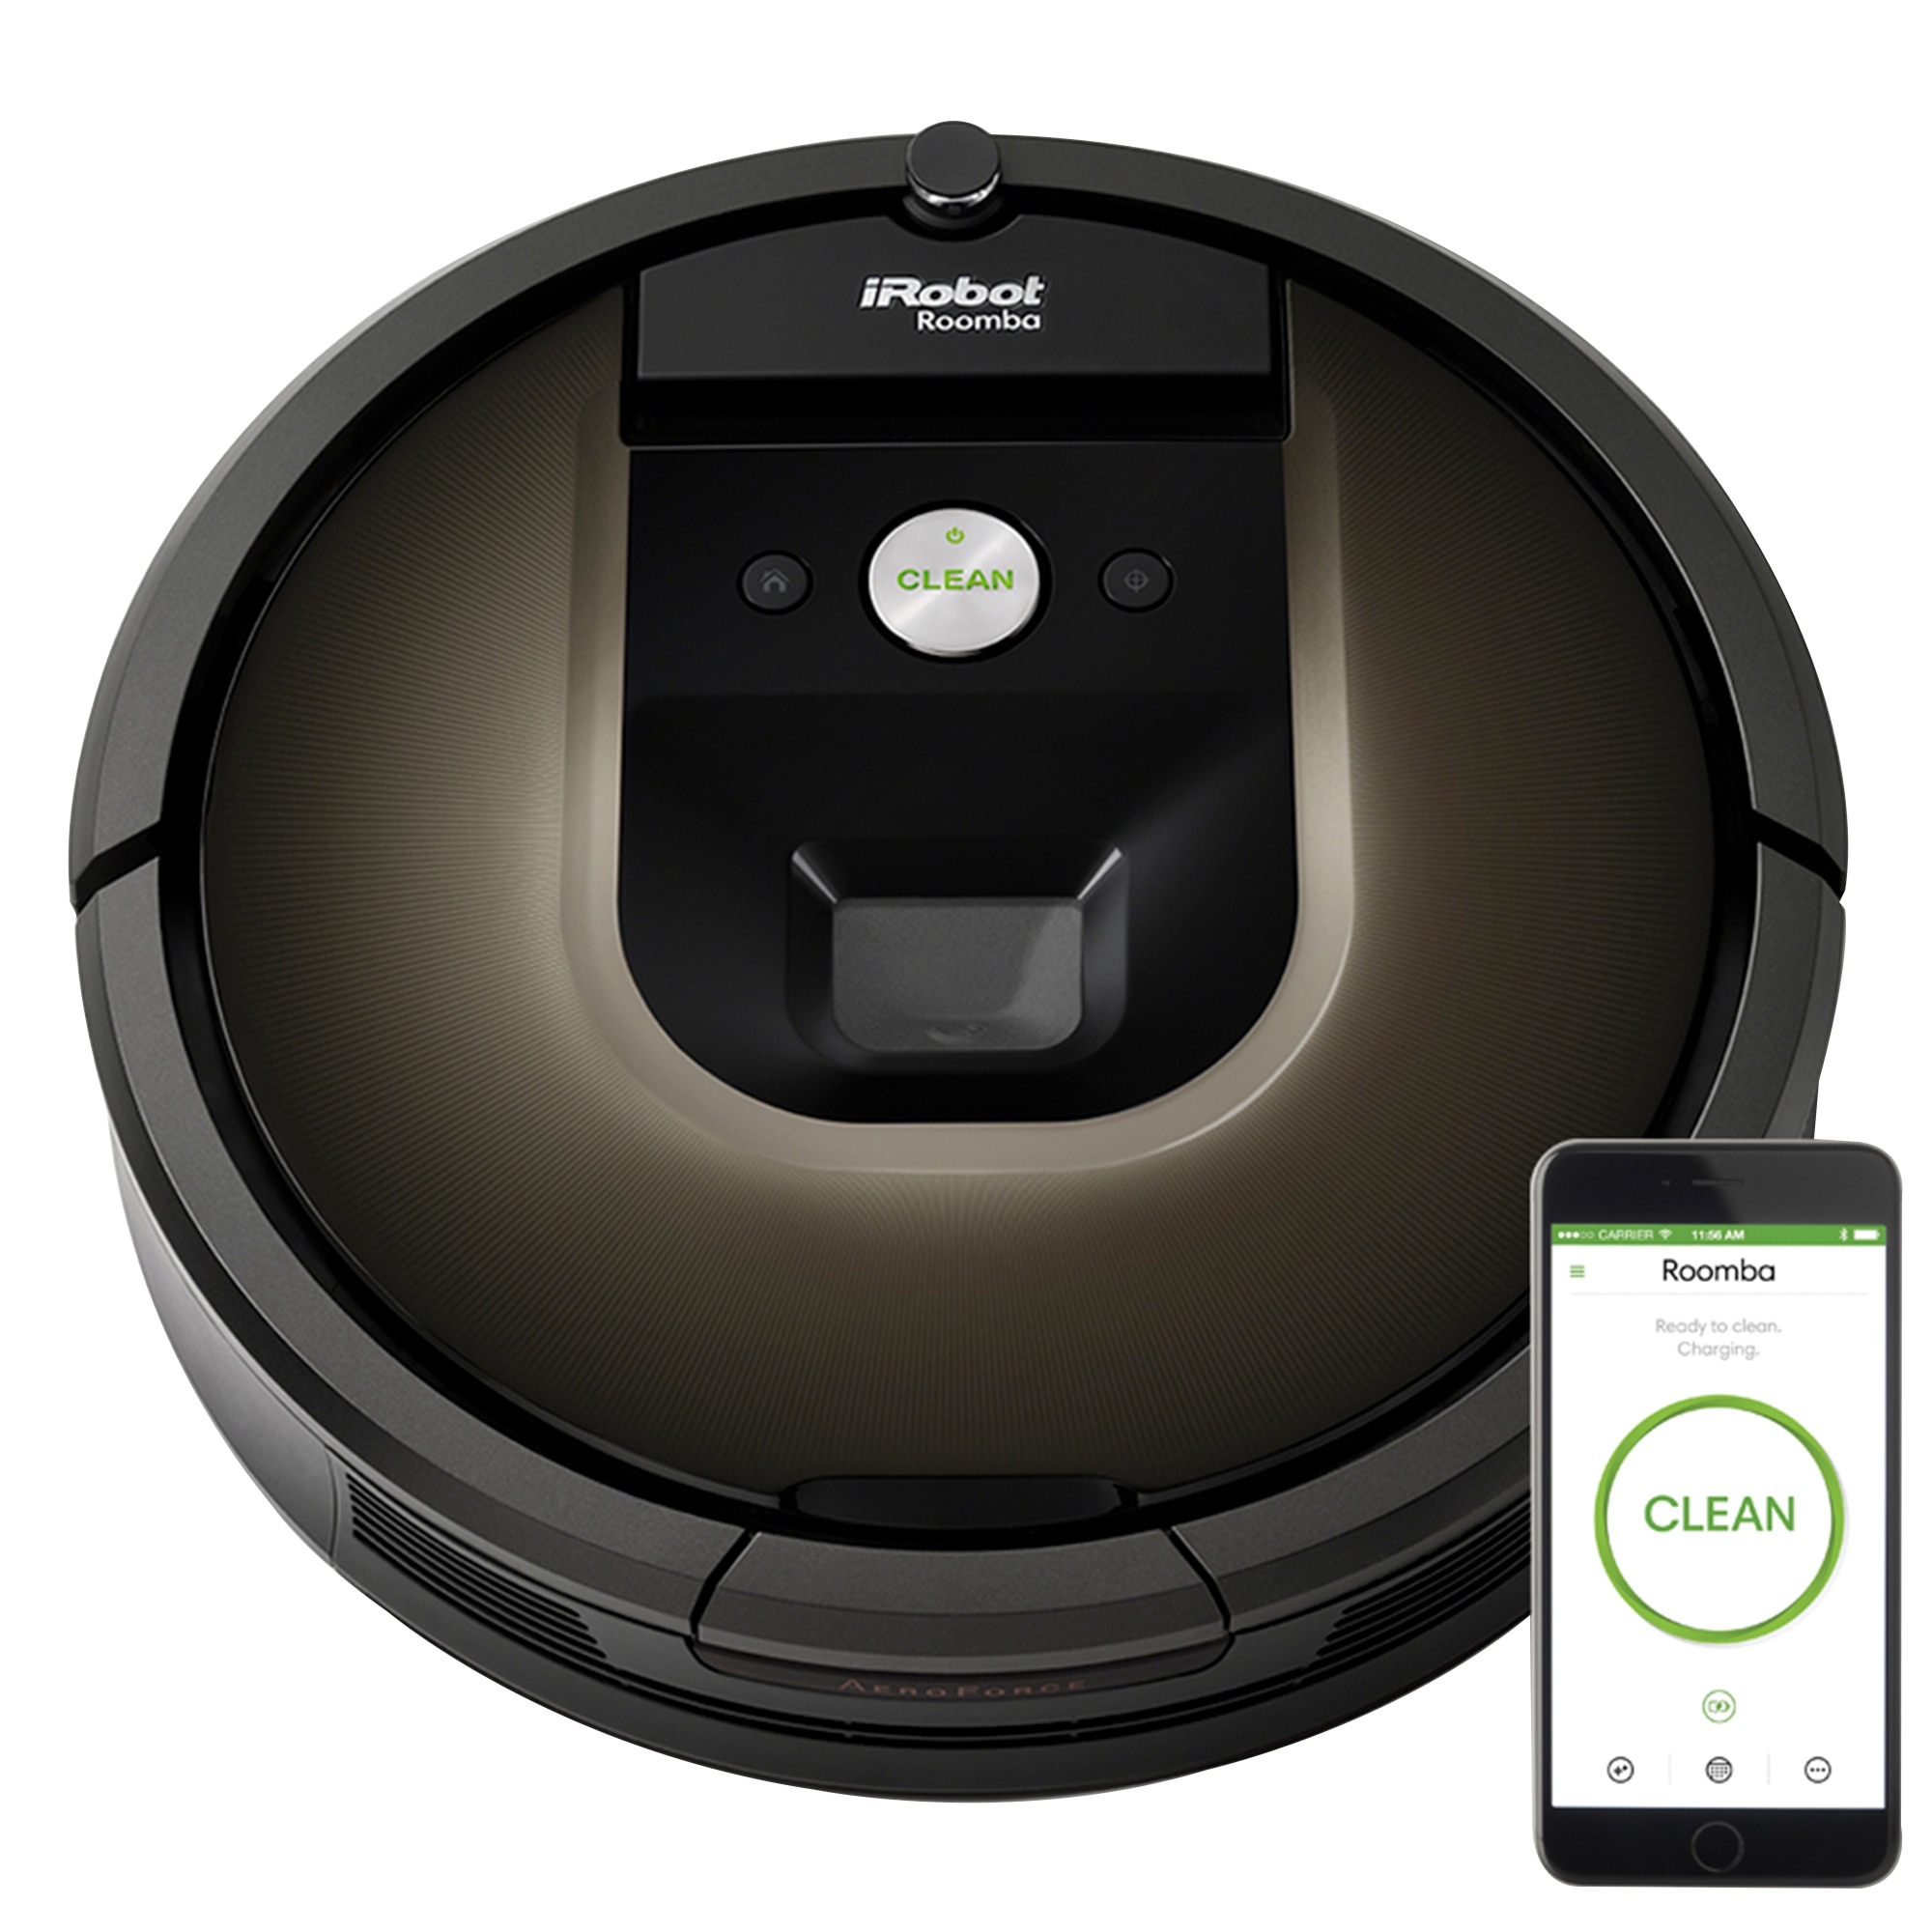 Home & Garden - Cleaning, Laundry & Vacuums - Robotic Vacuums